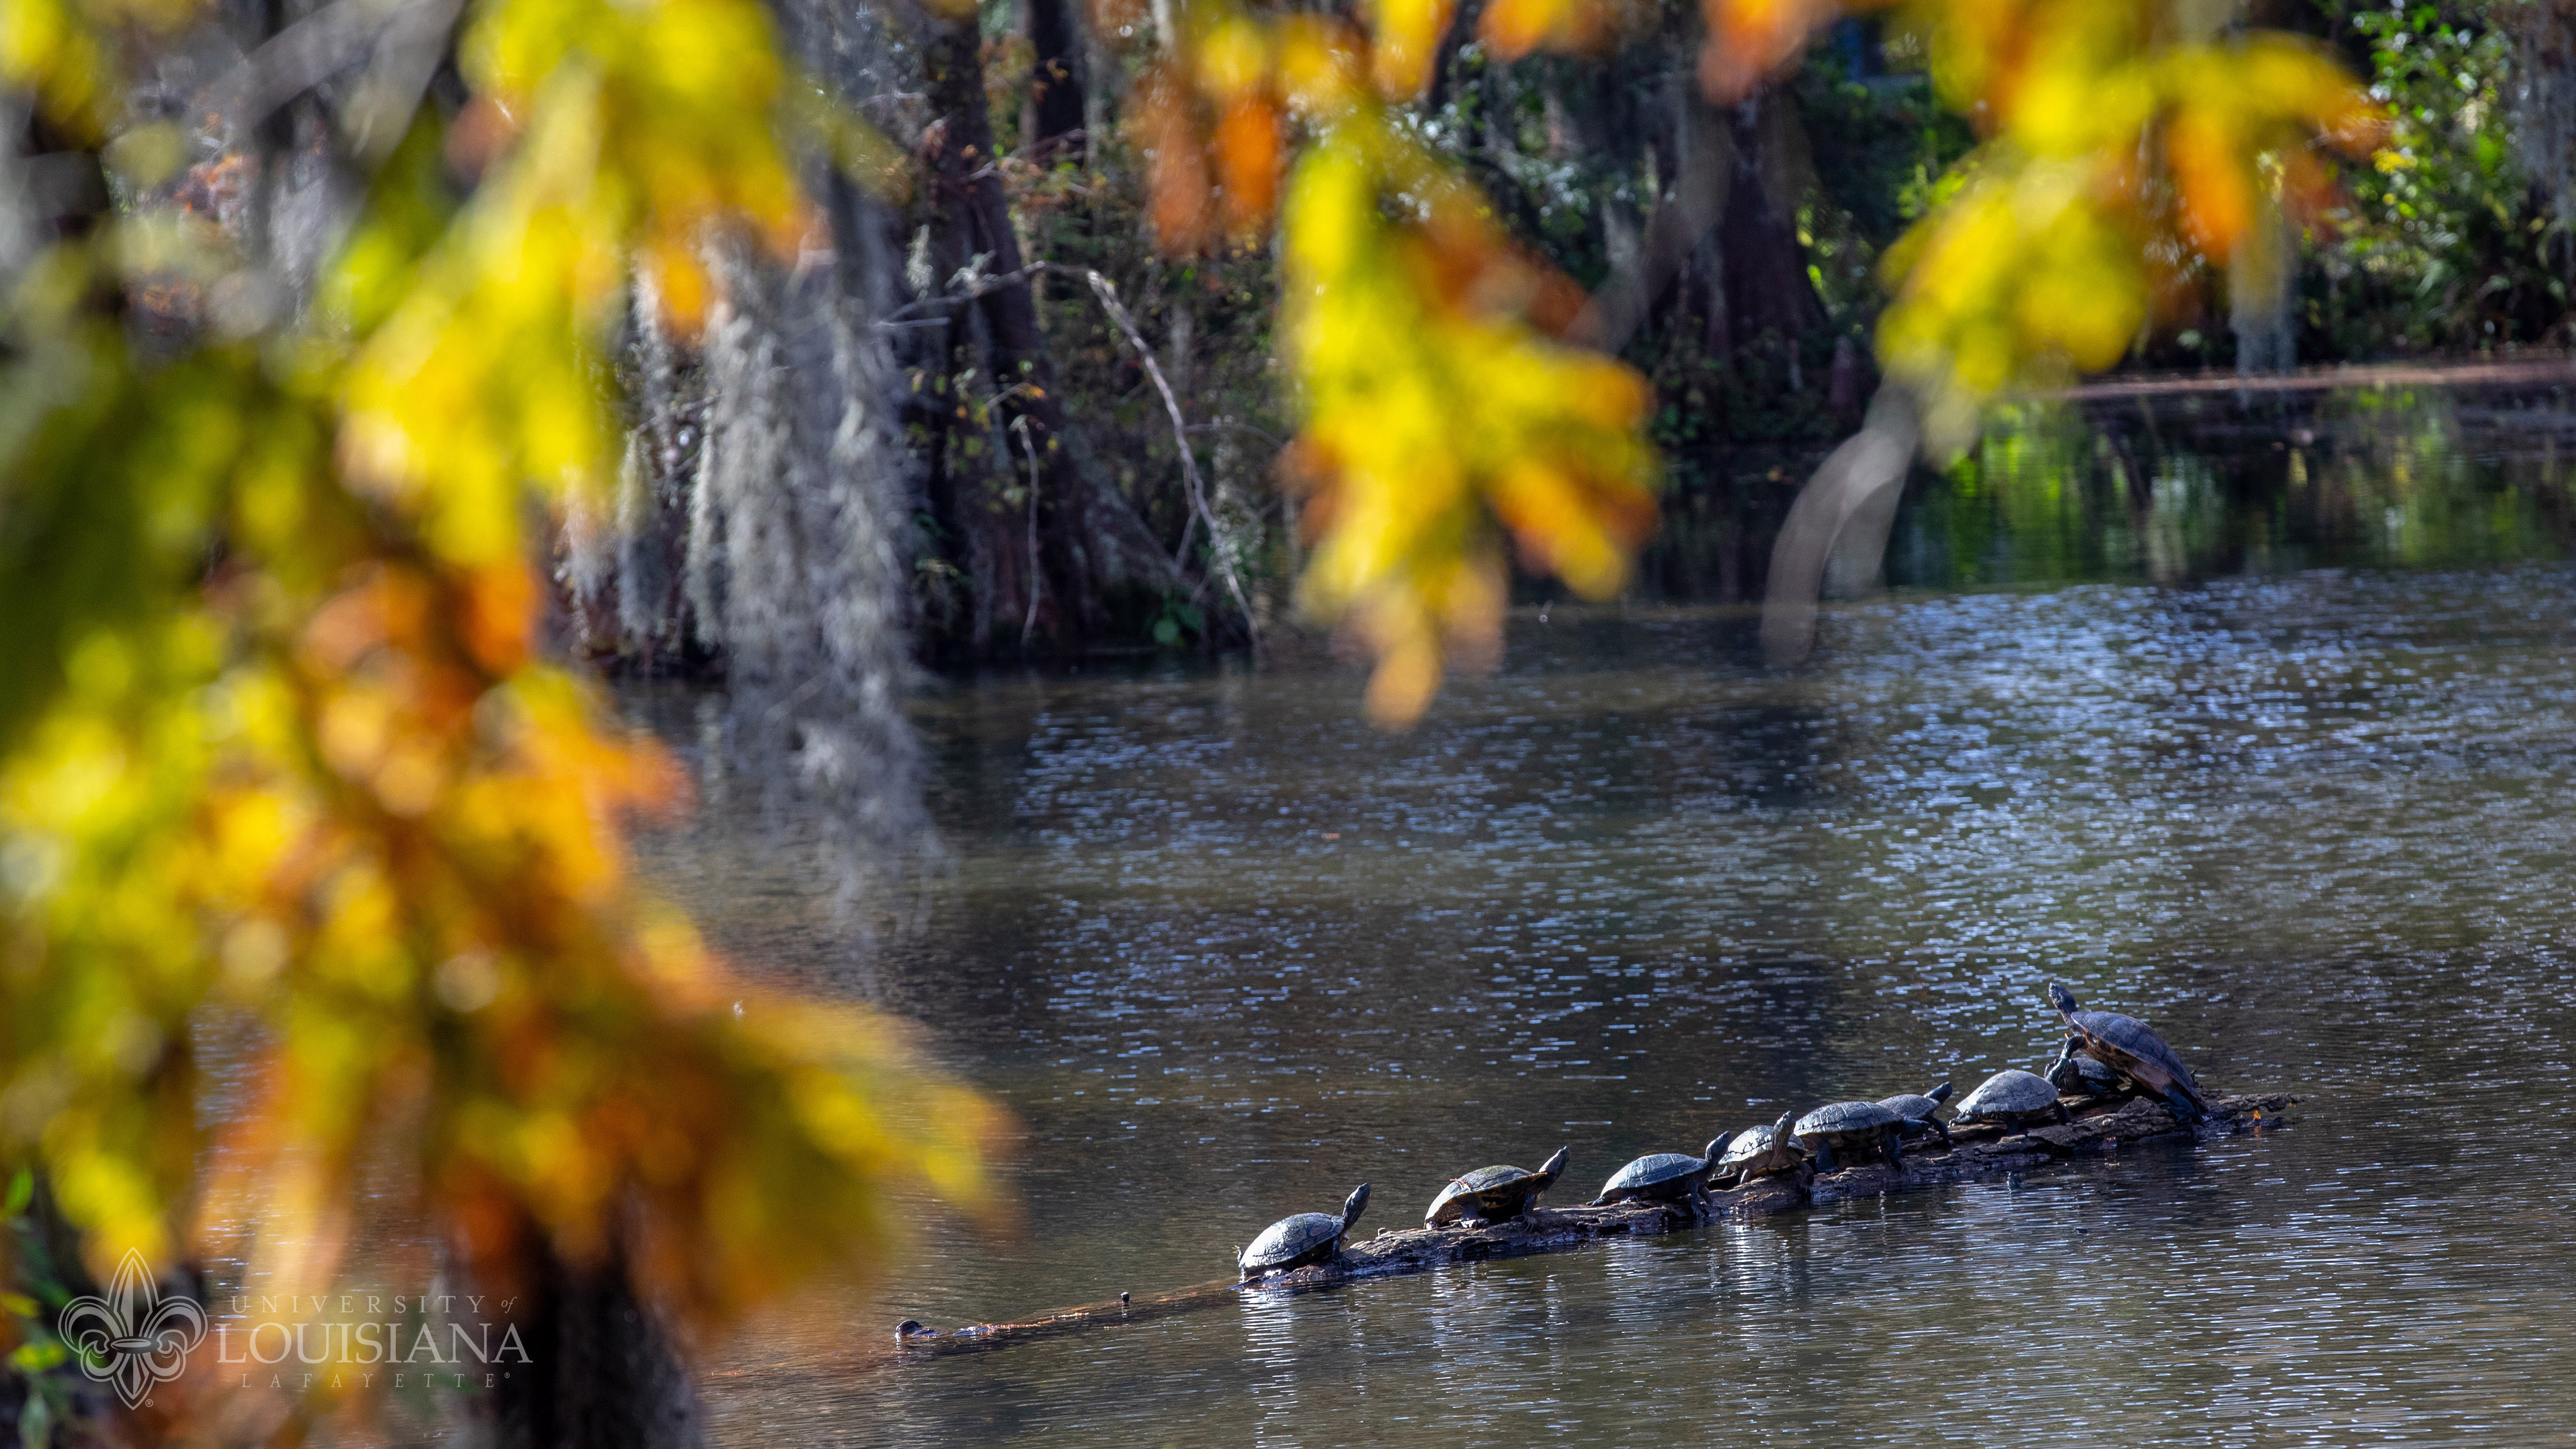 Image of turtles on a floating log in Cypress Lake at the University of Louisiana at Lafayette.